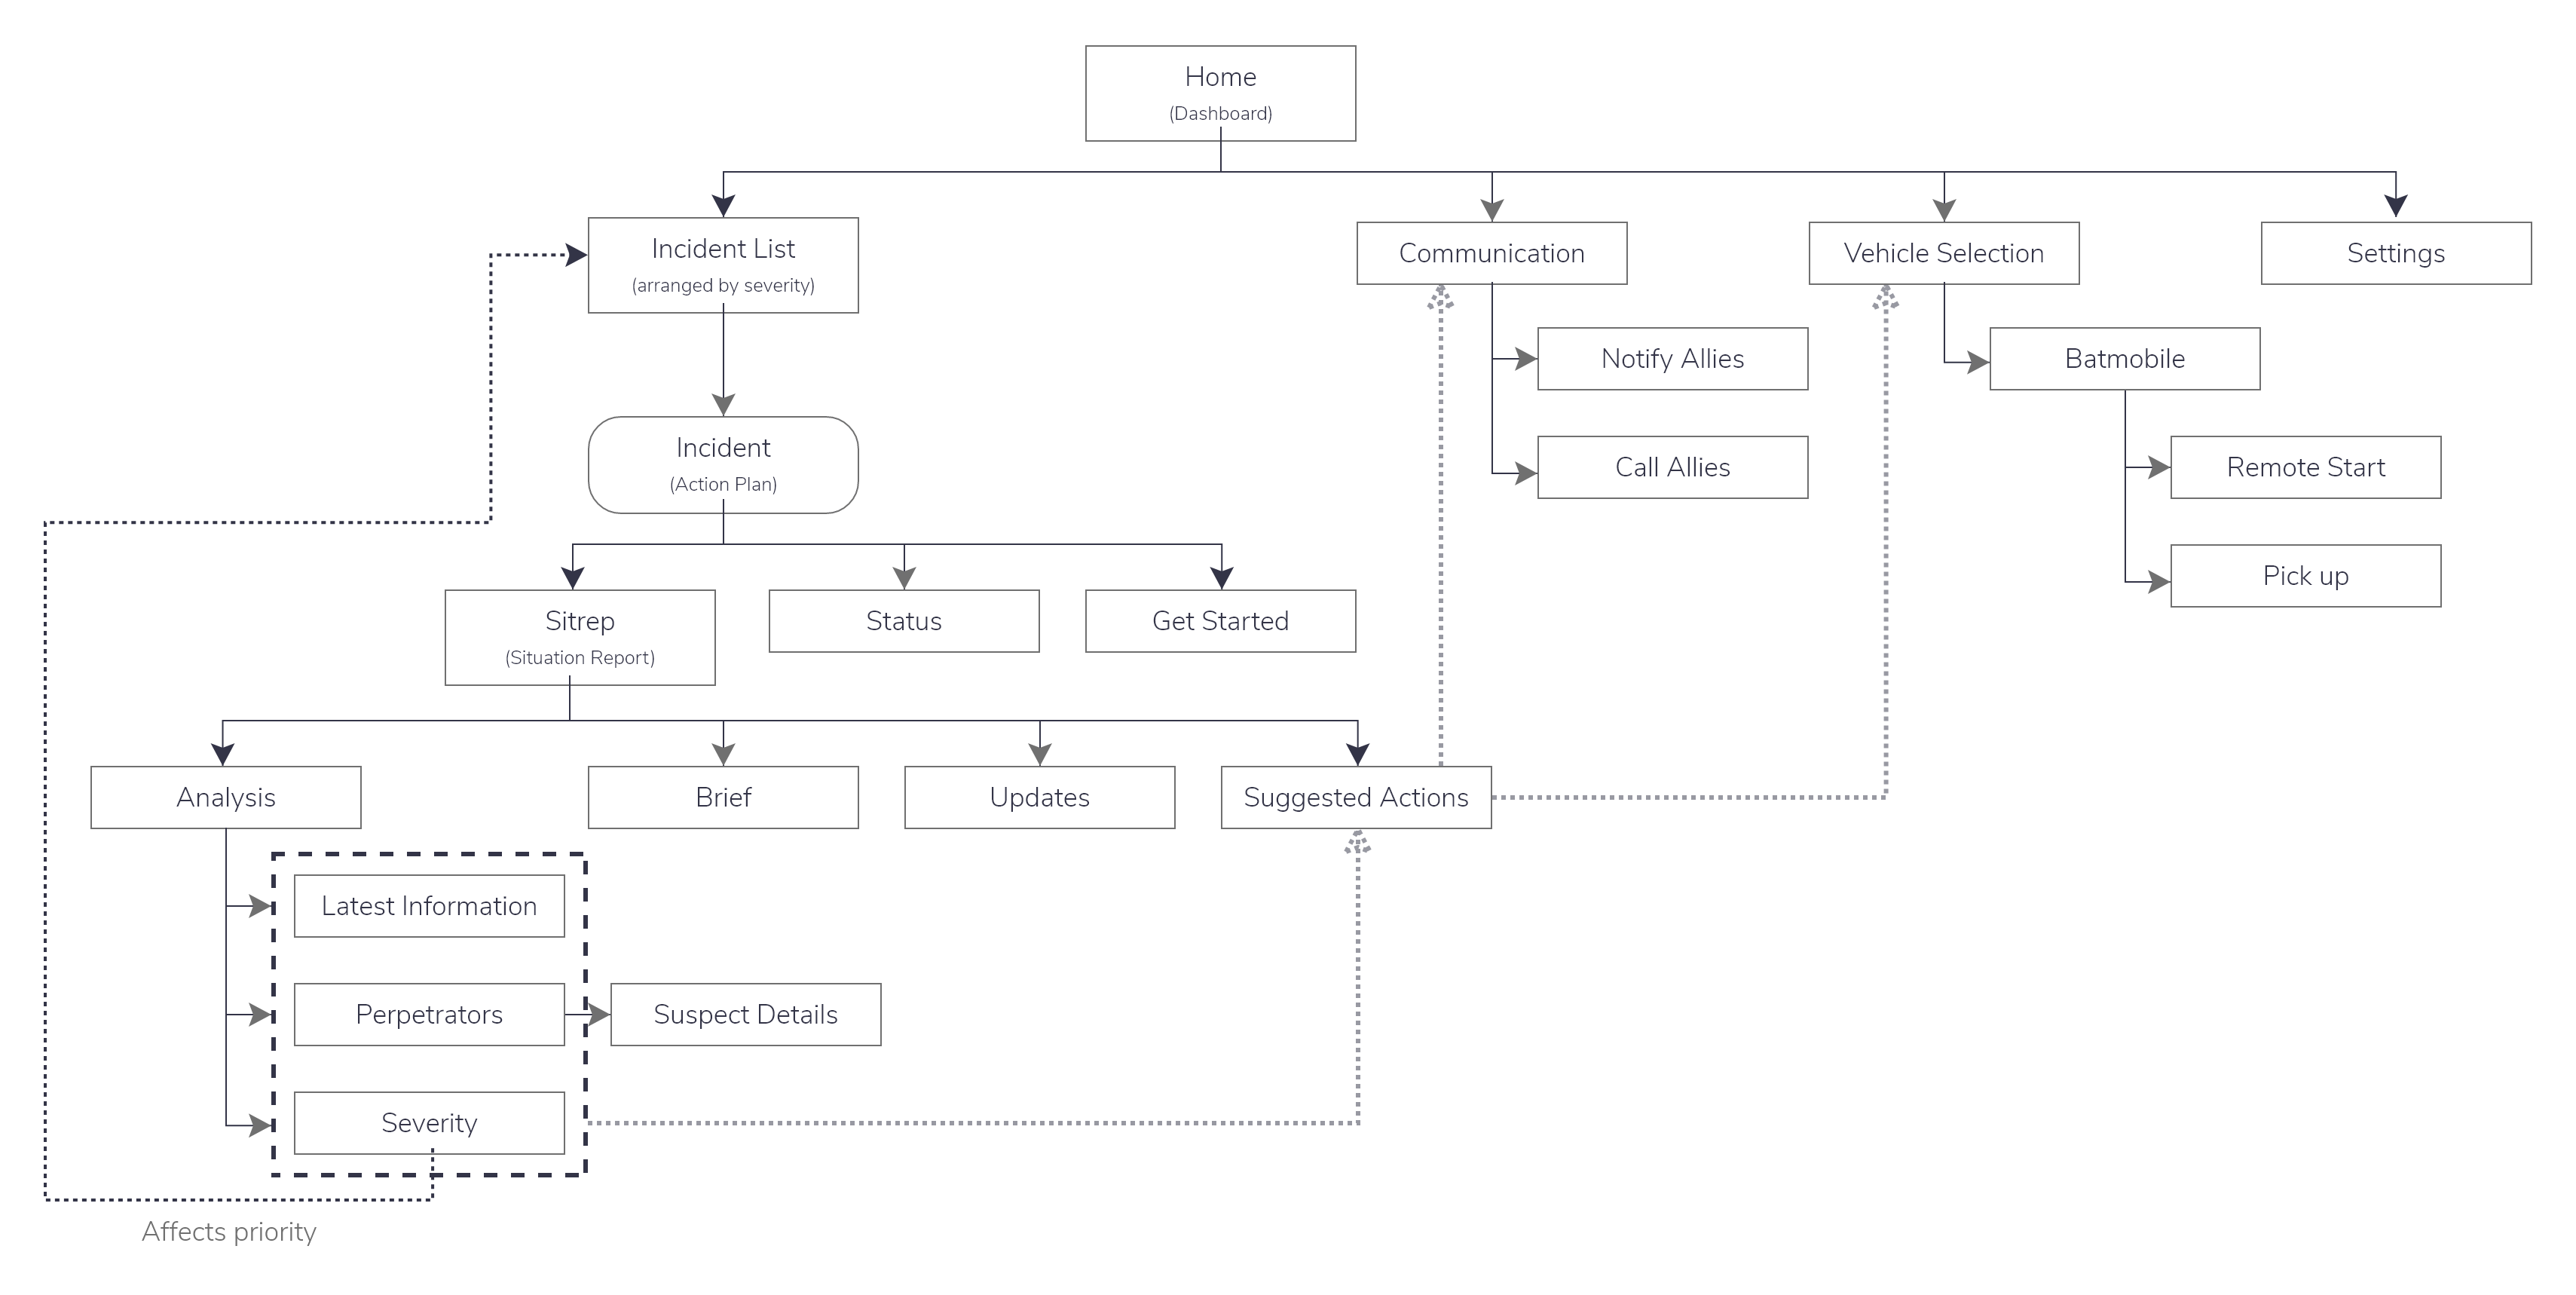 Diagram showing the navigational structure of the application